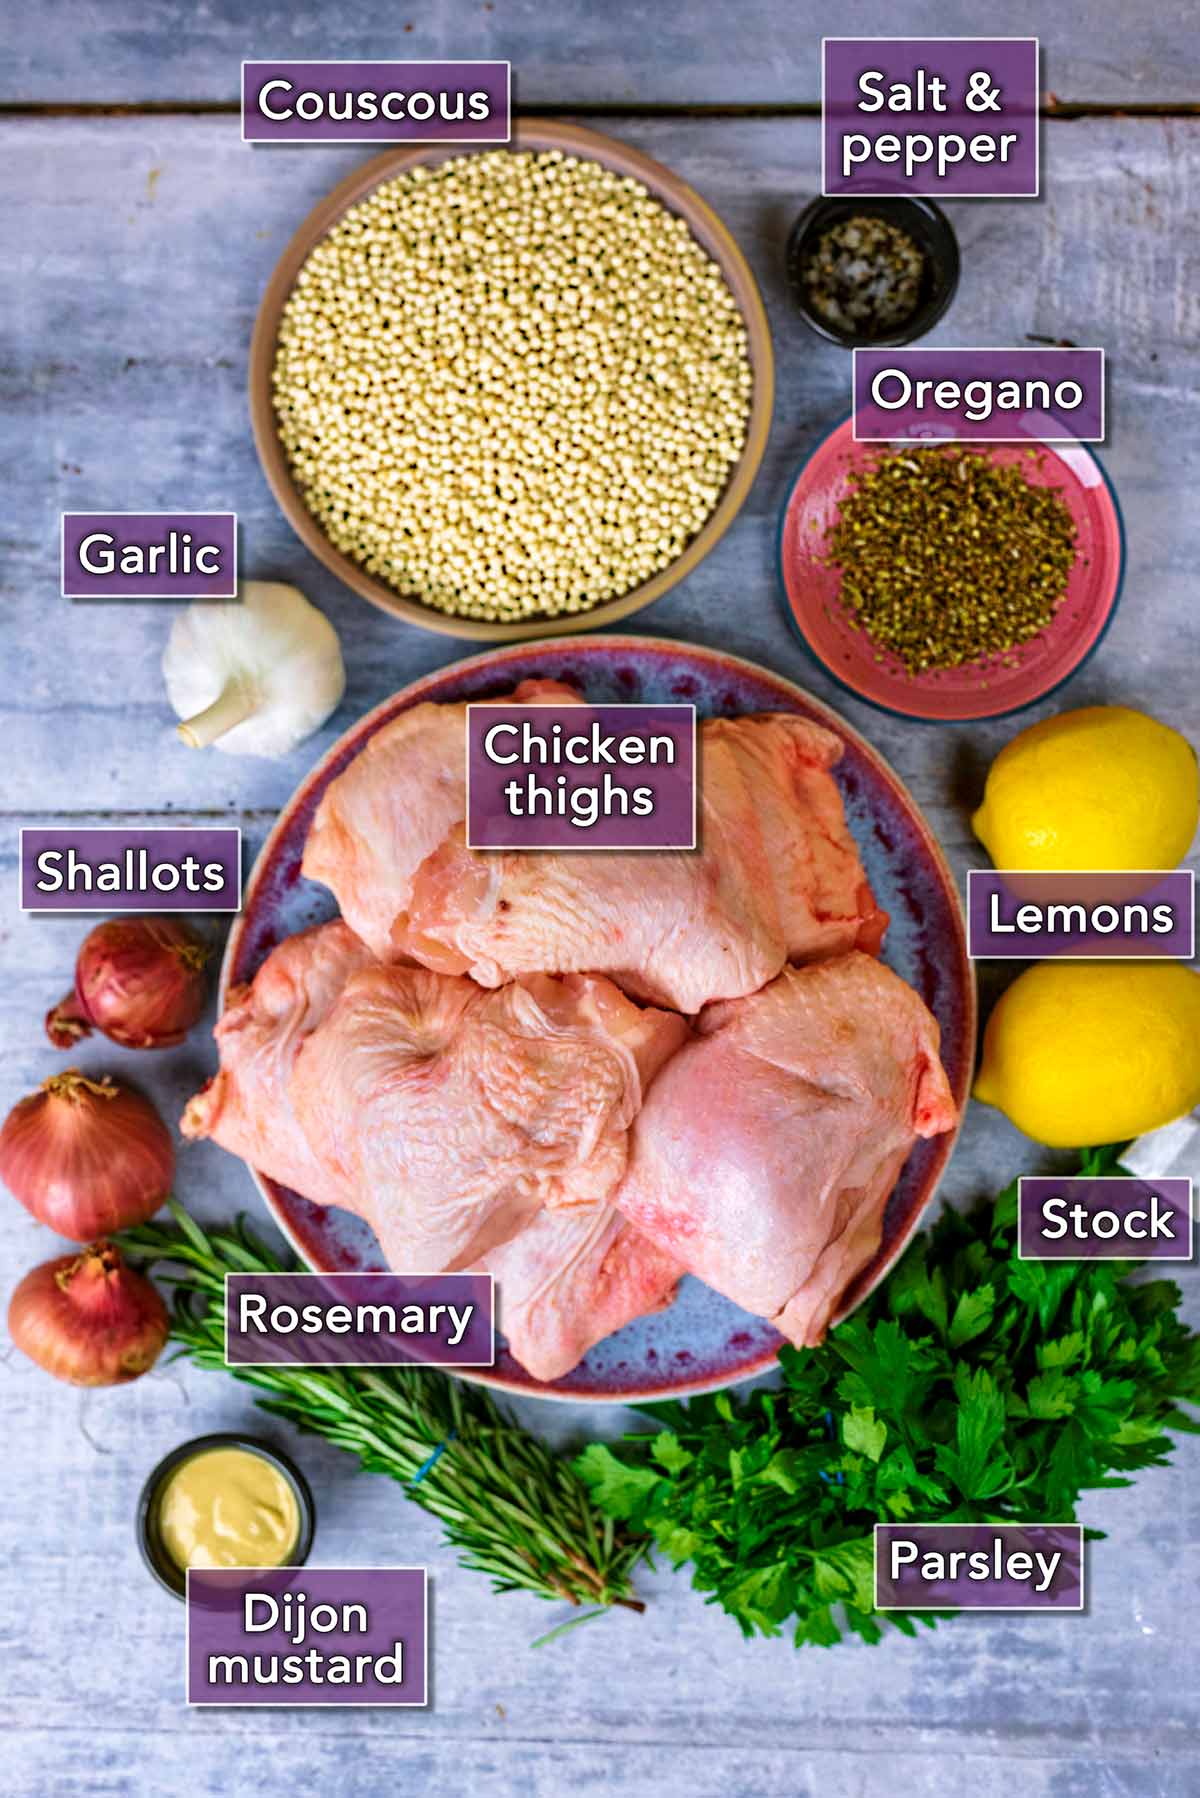 All the ingredients needed for this recipe laid out on a wooden surface.